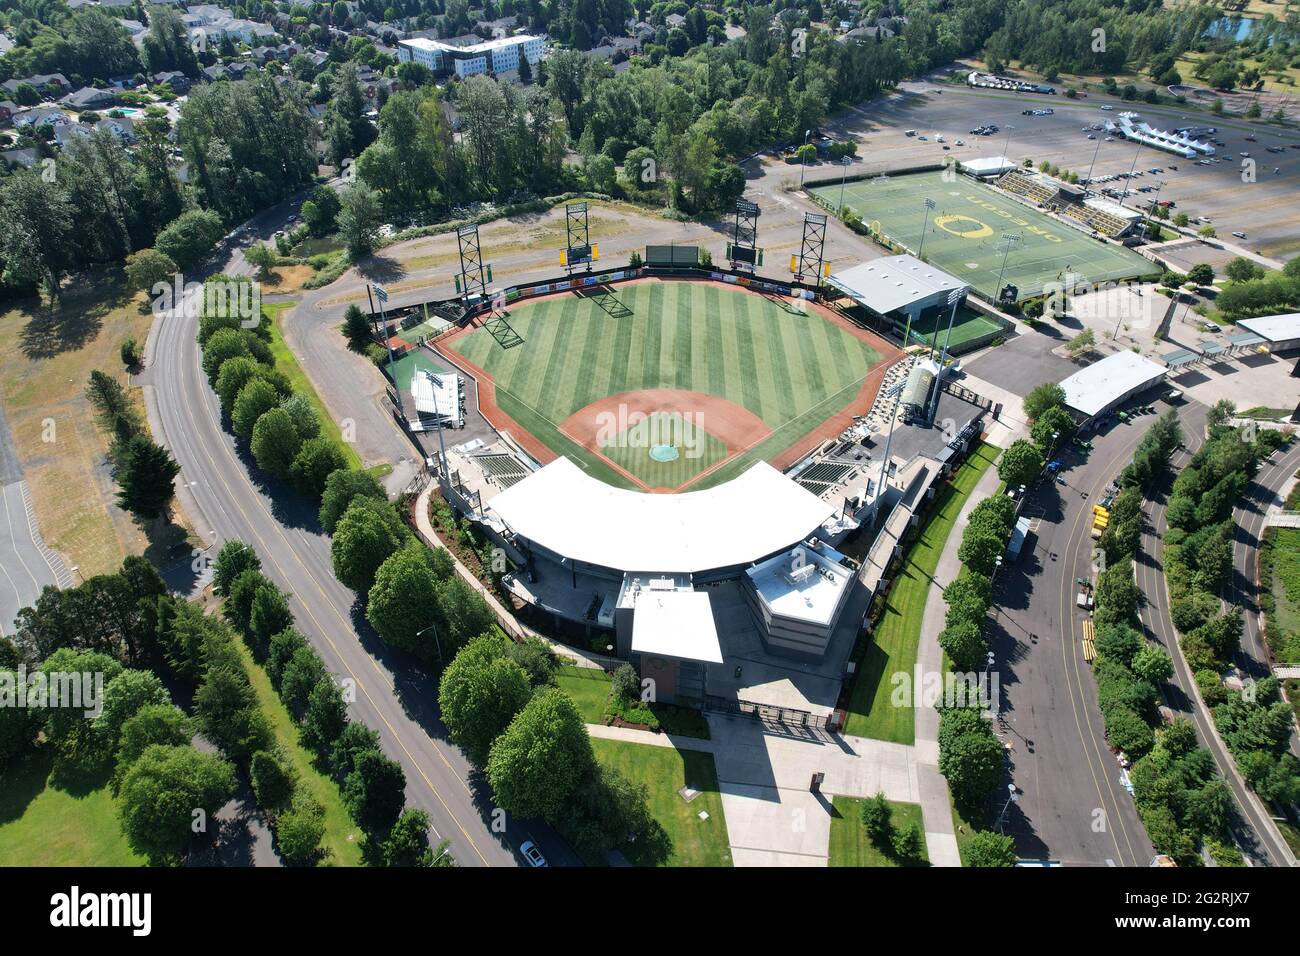 An aerial view of PK Park on the campus of University of Oregon